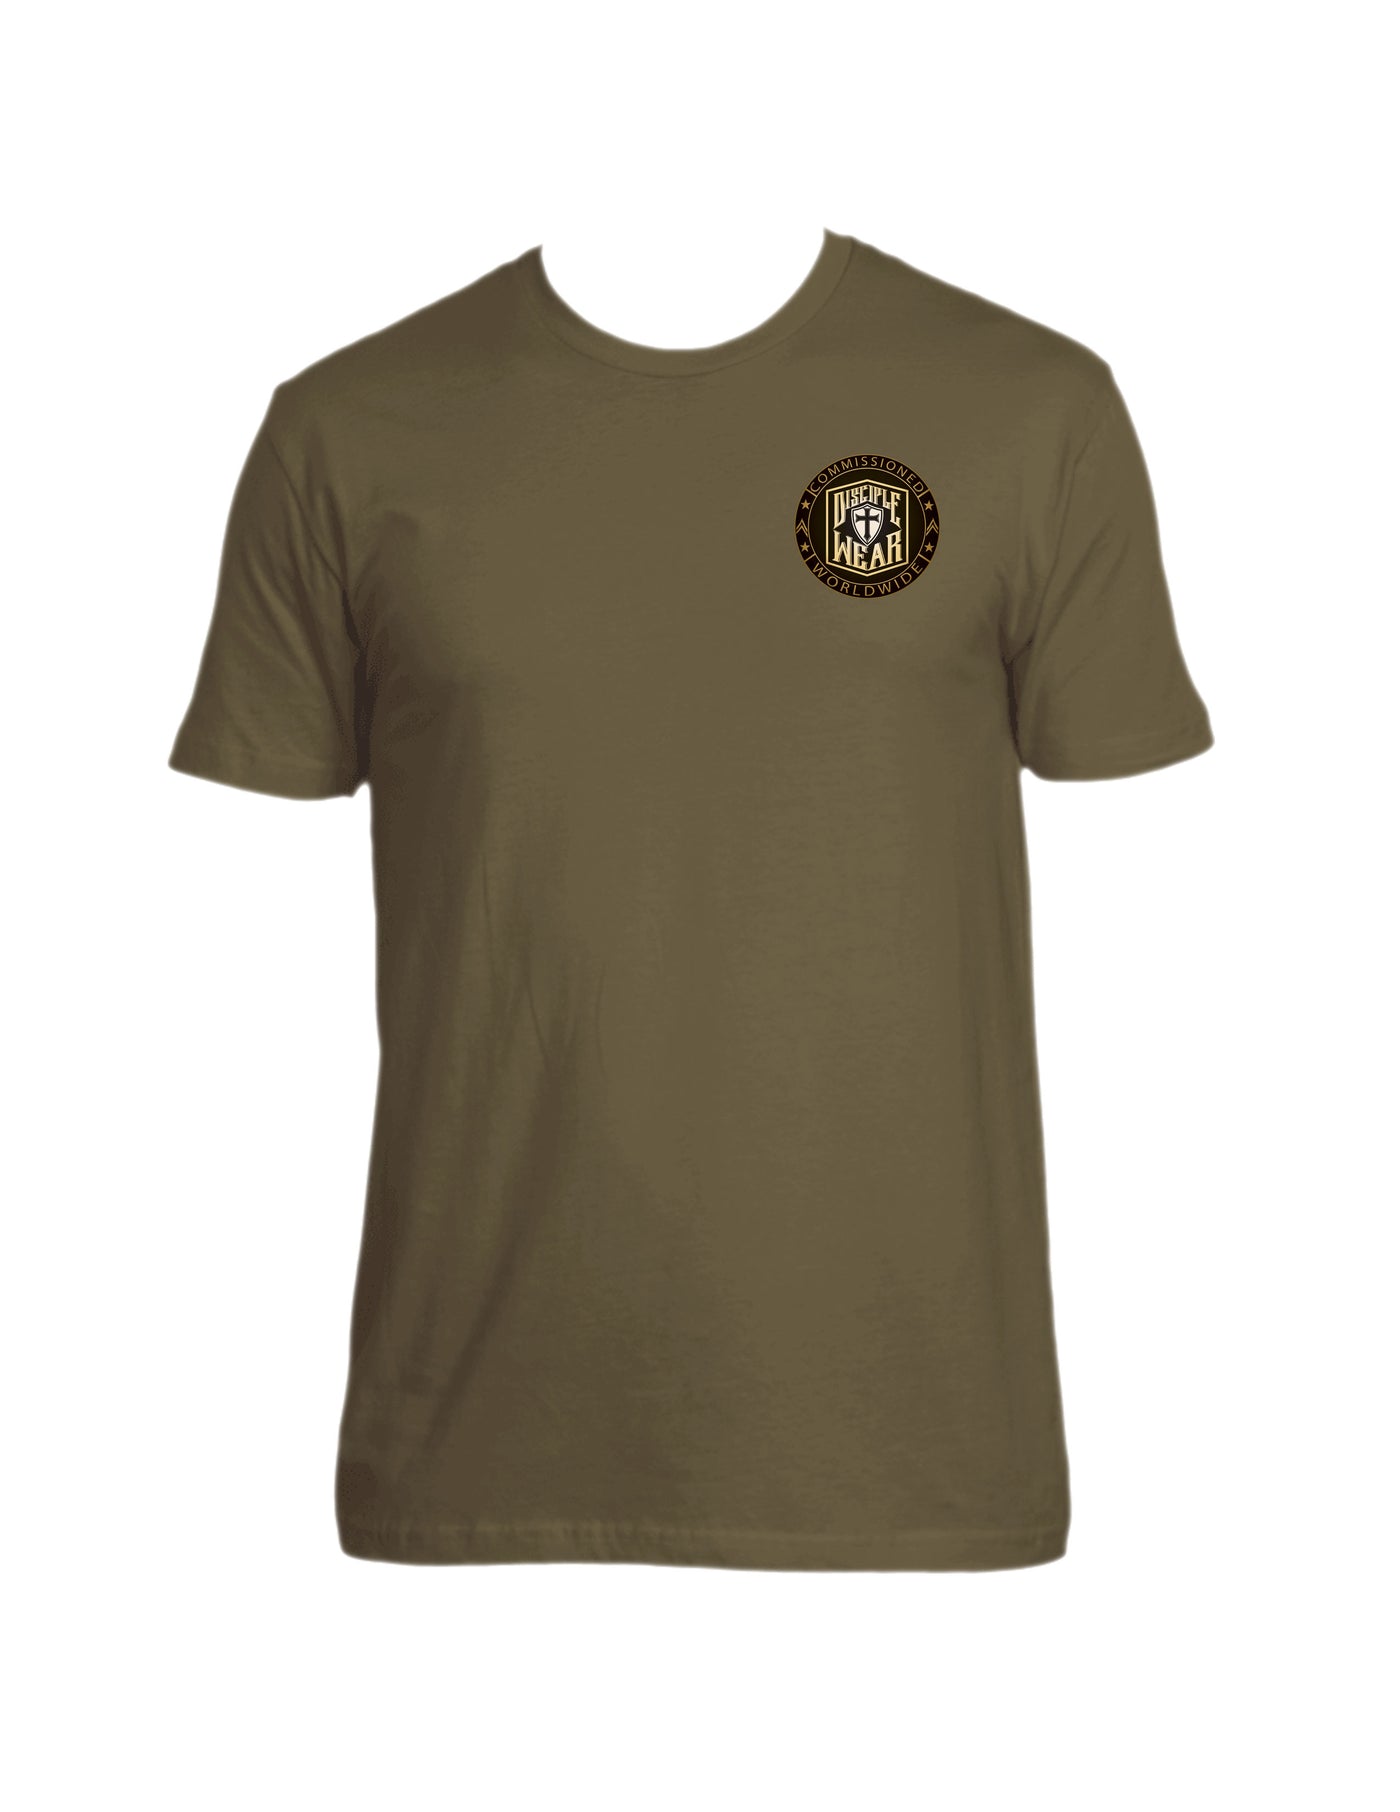 COMMISSIONED SEAL Mens Christian T Shirt  Front Tan